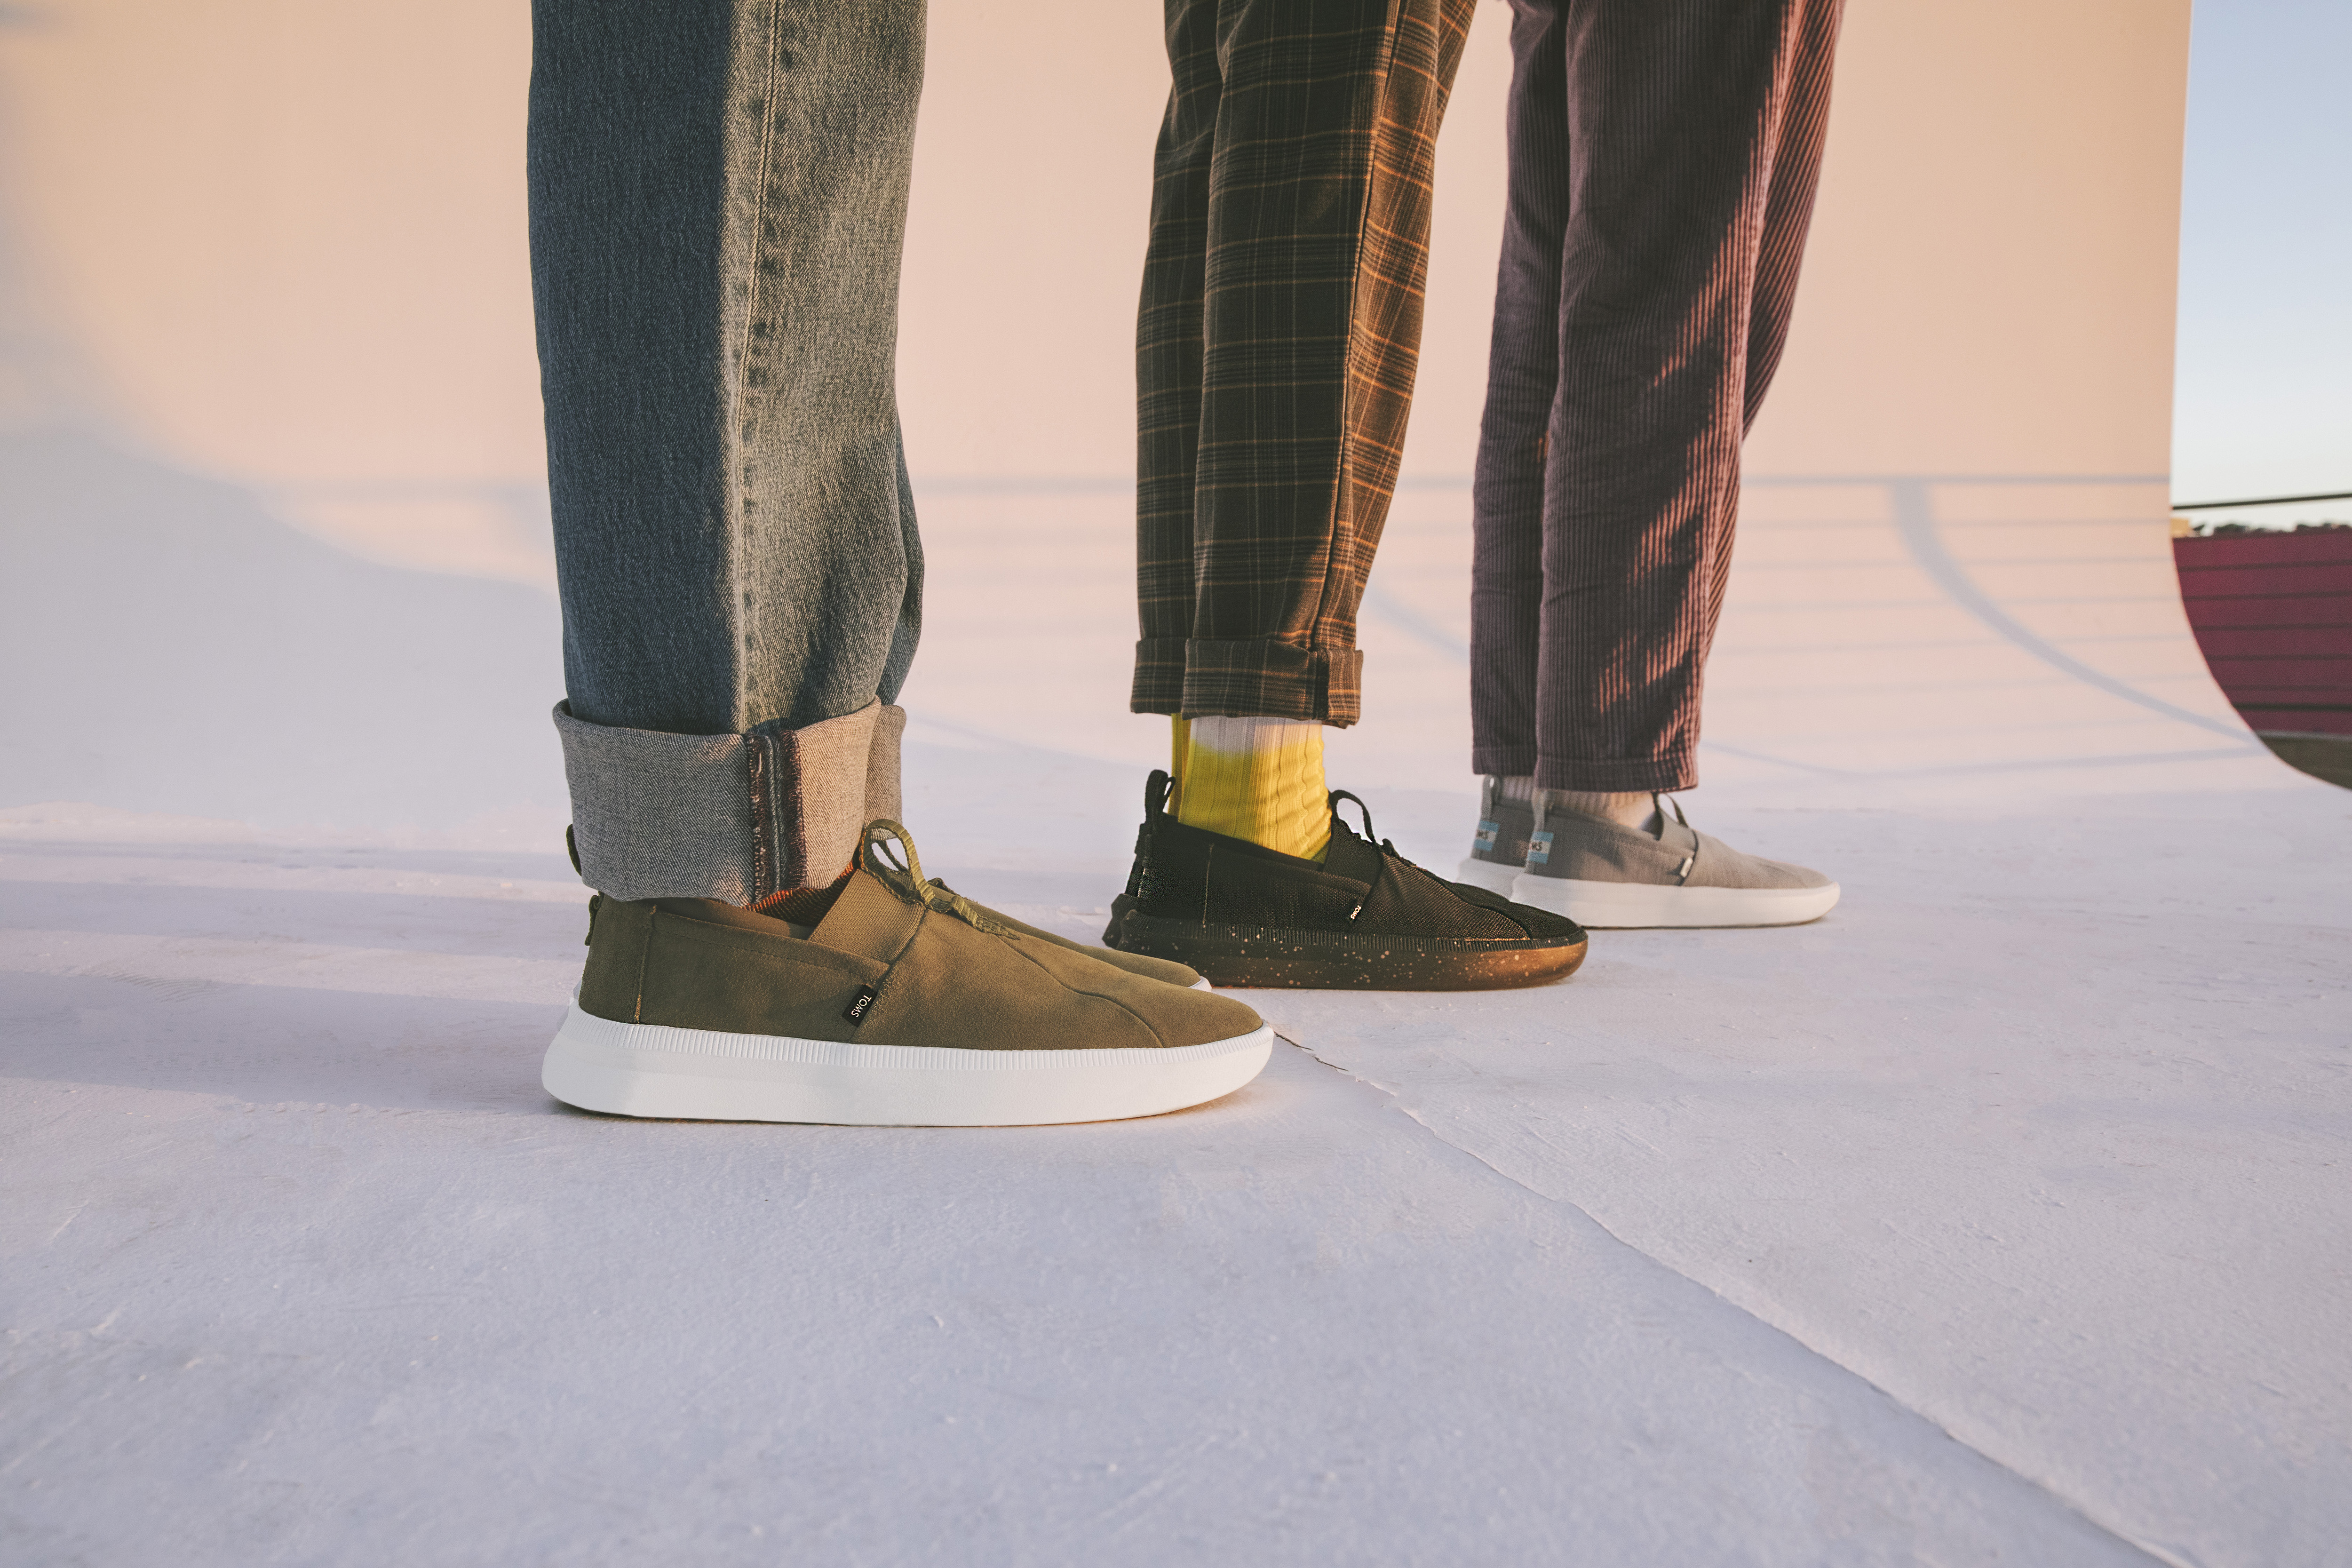 The Men's Rover Shoe is Only the Smallest Change Toms is Making - The Manual